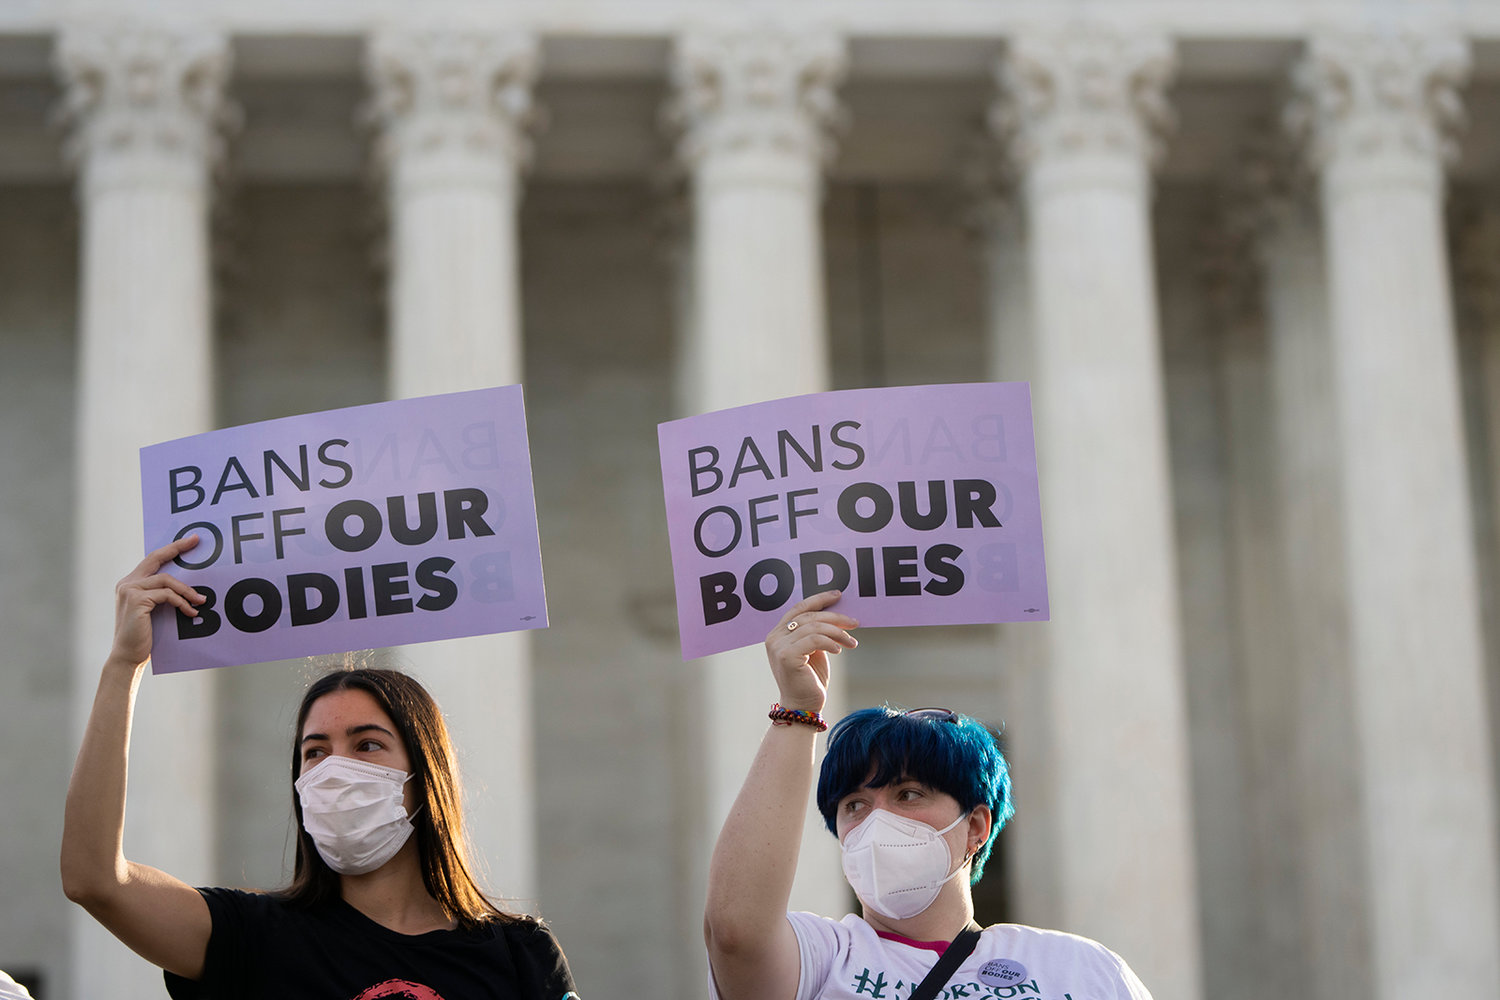 Pro-choice demonstrators rally outside the U.S. Supreme Court on Nov. 1, 2021 in Washington, DC. (Drew Angerer/Getty Images/TNS)